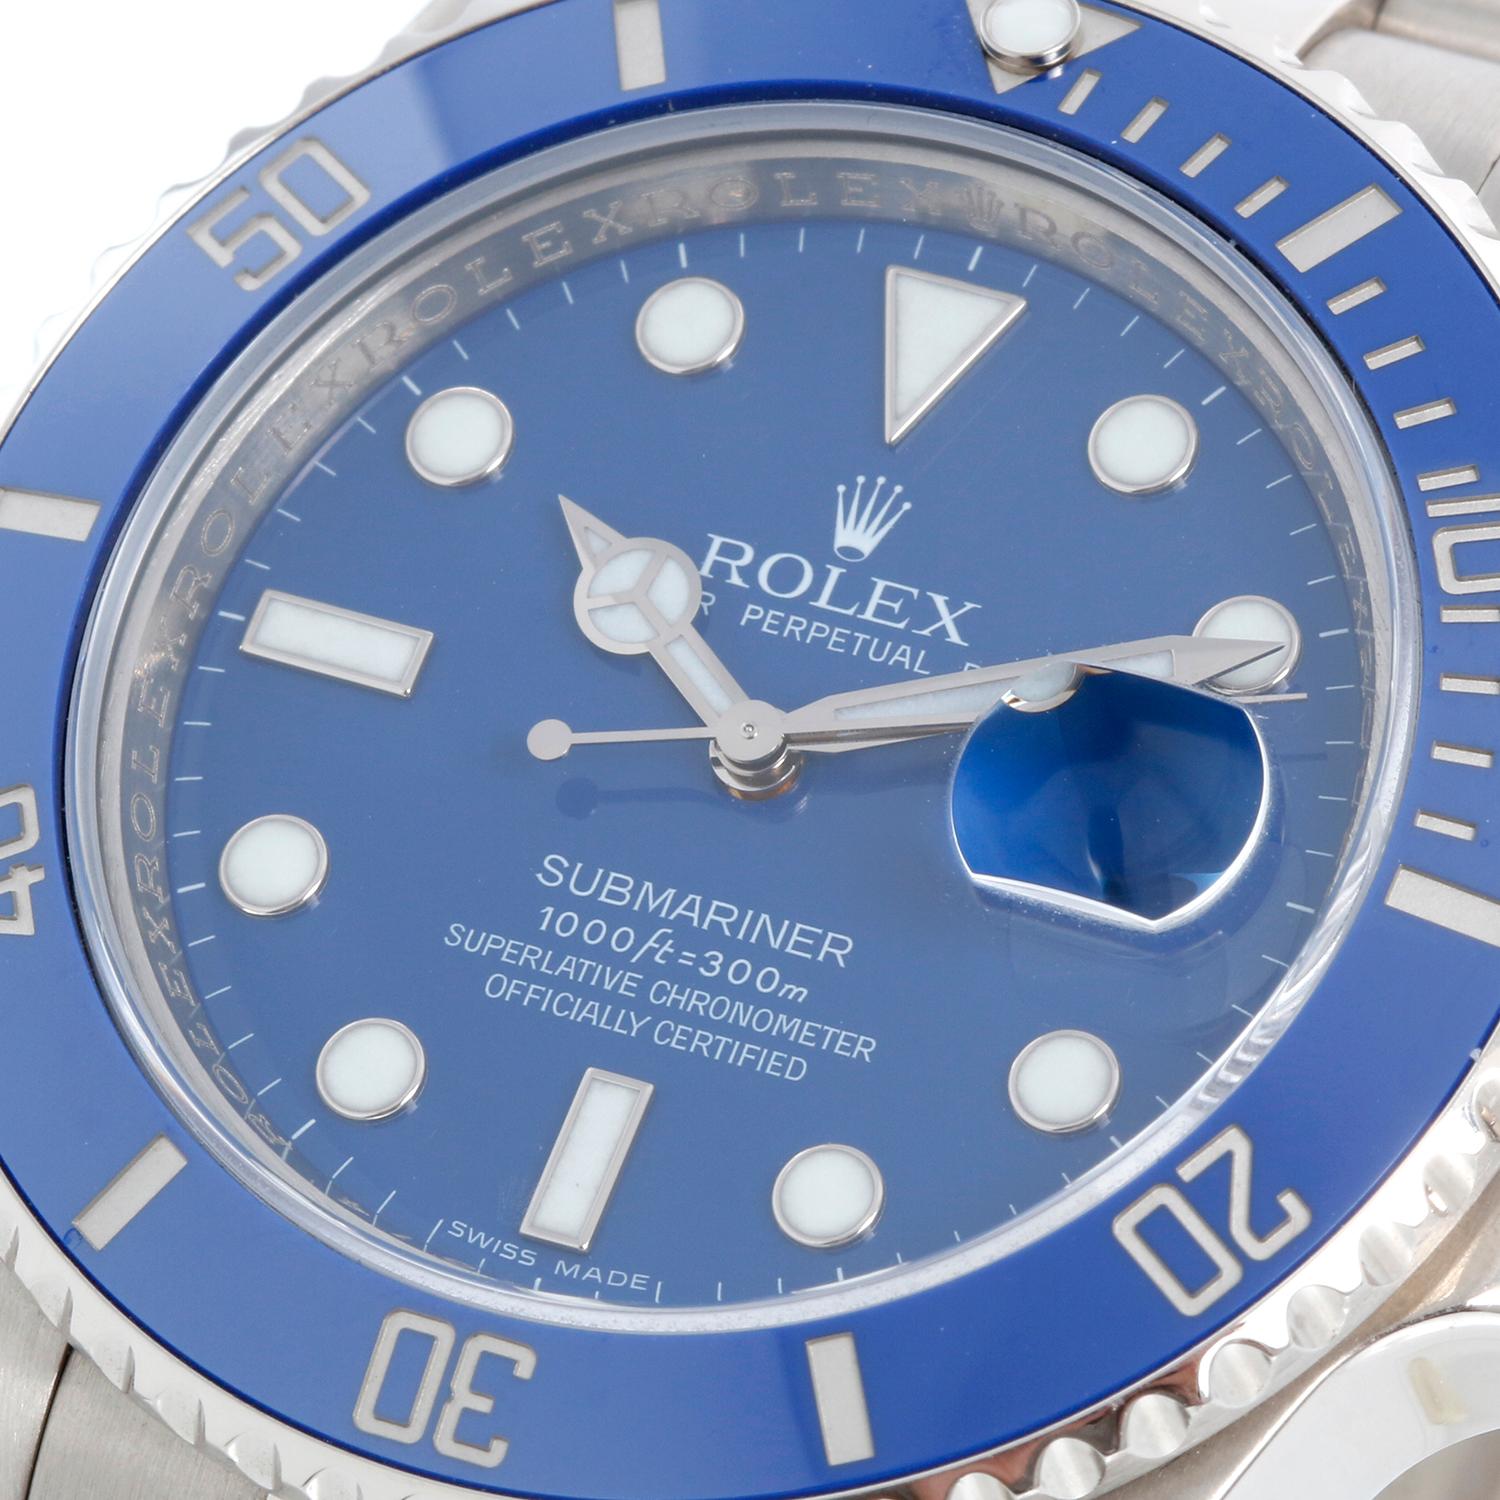 Rolex Submariner 18k White Gold Men's Watch 116619 LB (or 116619LB) - Automatic winding, 31 jewel, sapphire crystal, pressure-proof to 1,000 feet, date. 18k white gold case with blue Cerachrom bezel. Blue dial with luminous style markers. 18k white